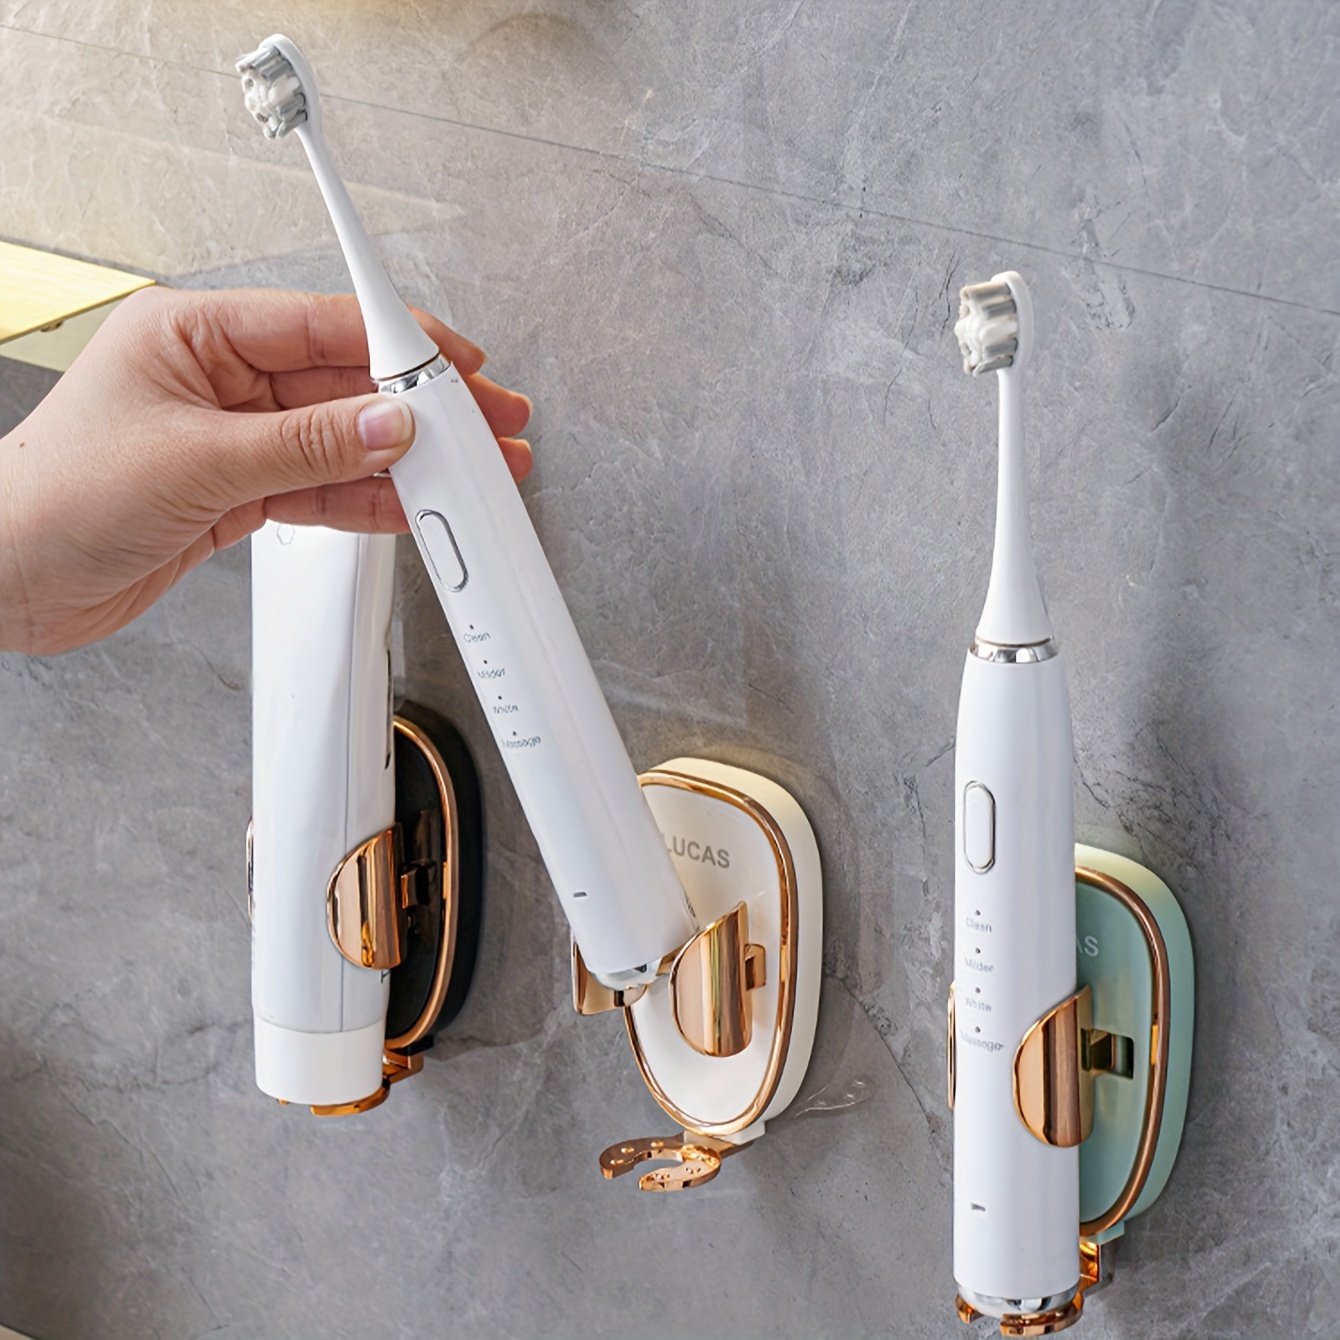 

Upgrade Your Bathroom With This Wall-mounted, Punch-free Electric Toothbrush Holder!, Home Decor, Furniture For Home